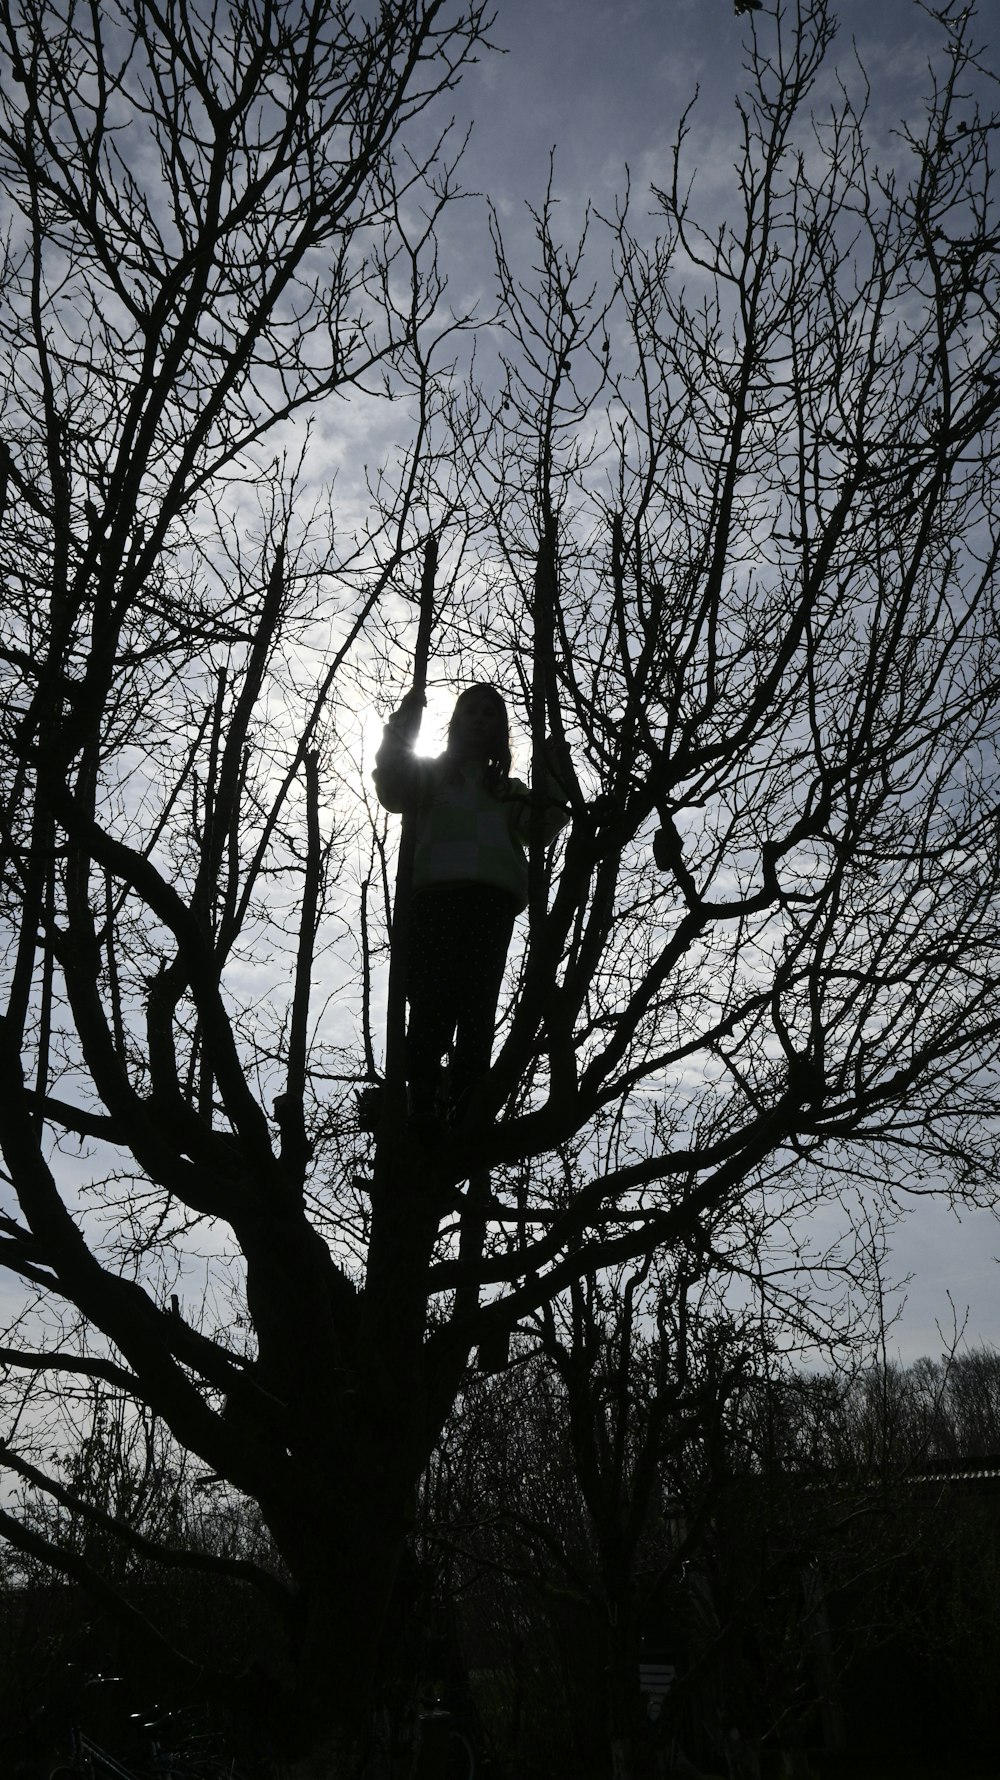 a man is up in a tree with no leaves